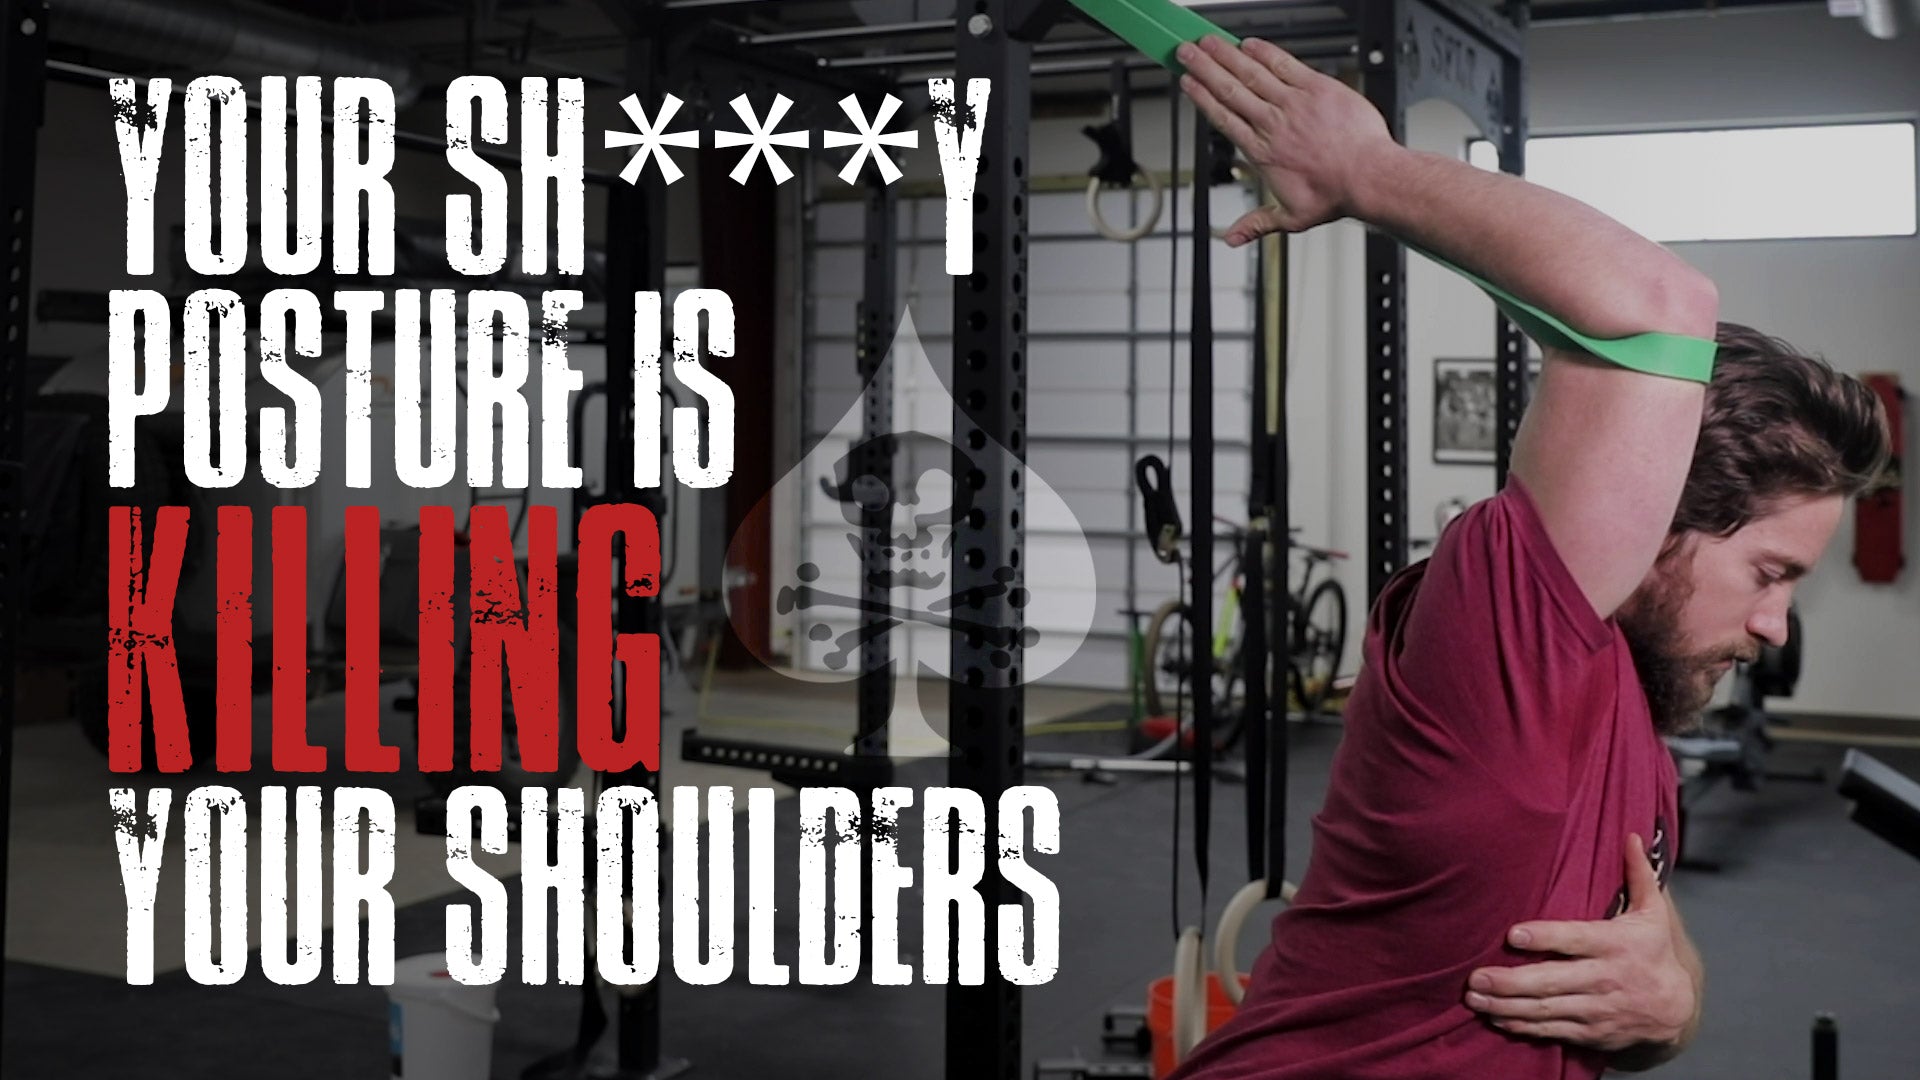 Your Sh***y Posture is KILLING your Shoulders